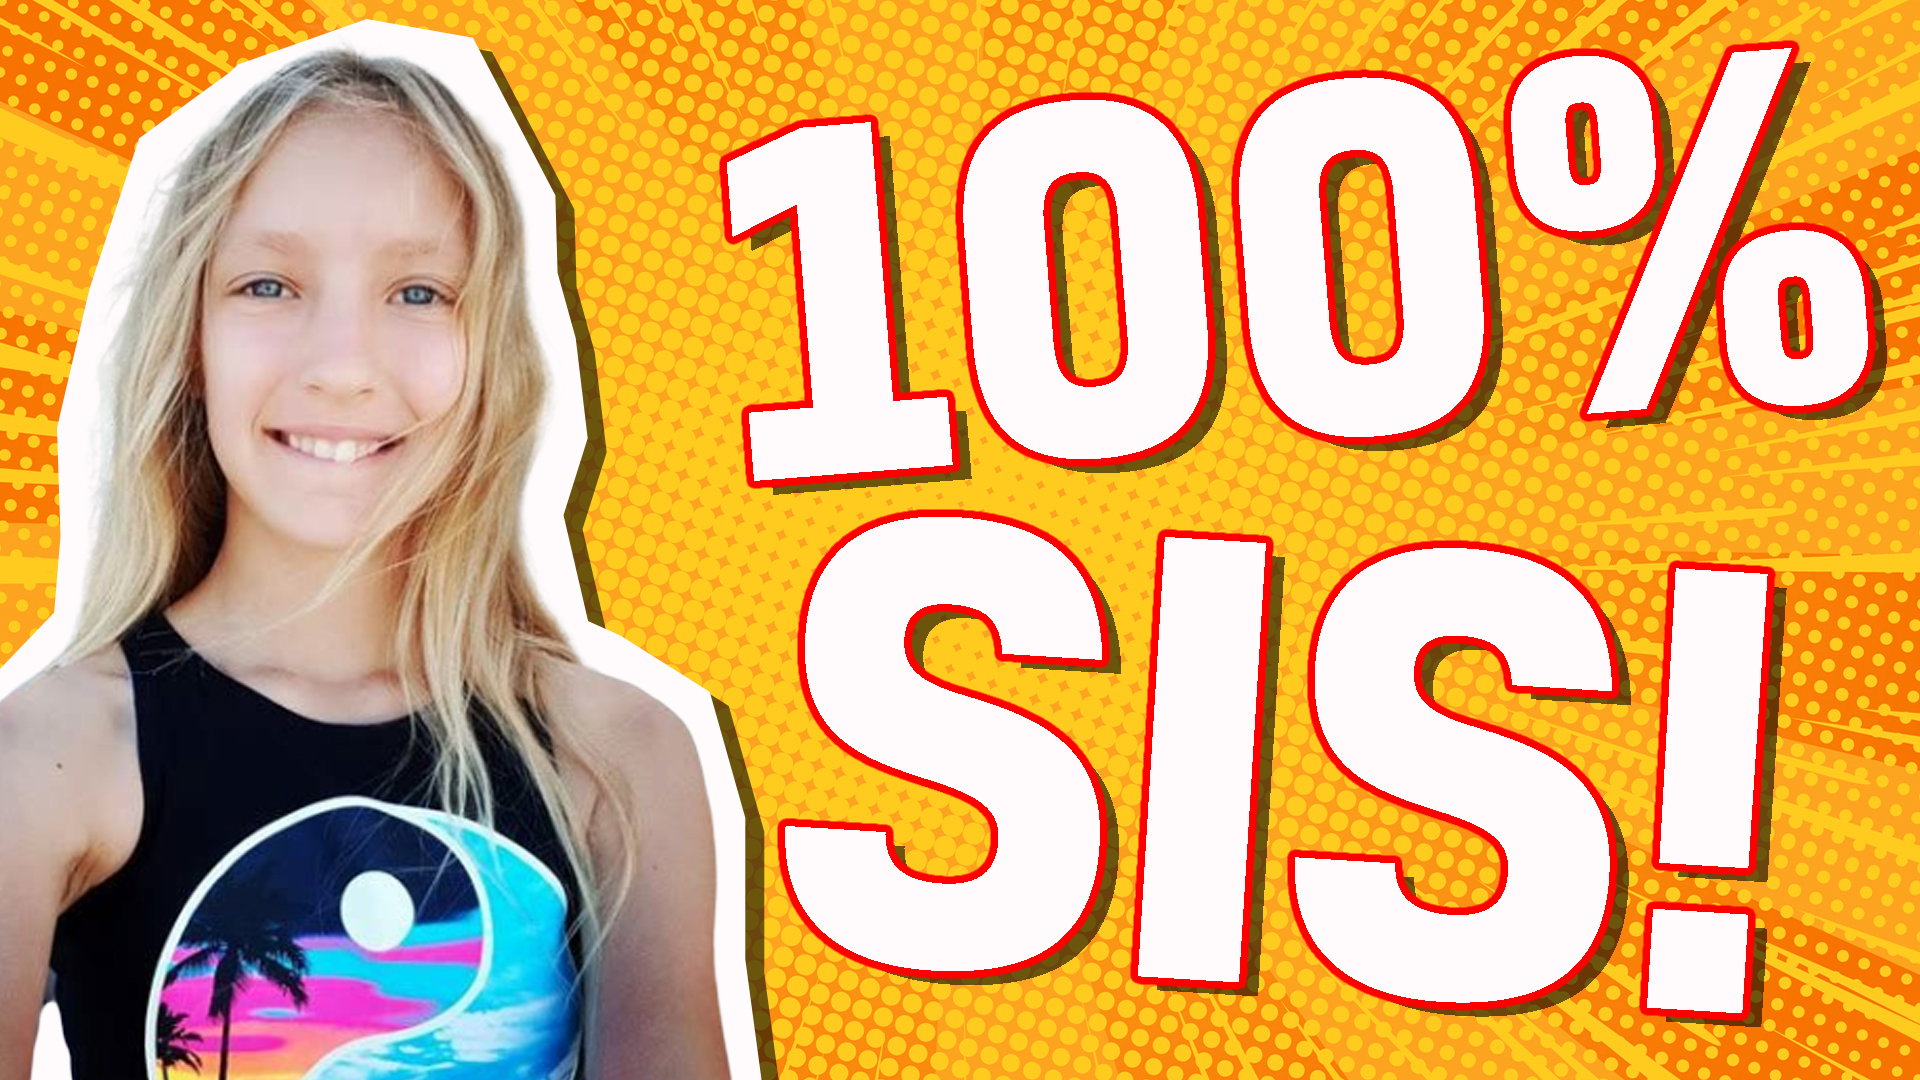 You are: 100% SIS!